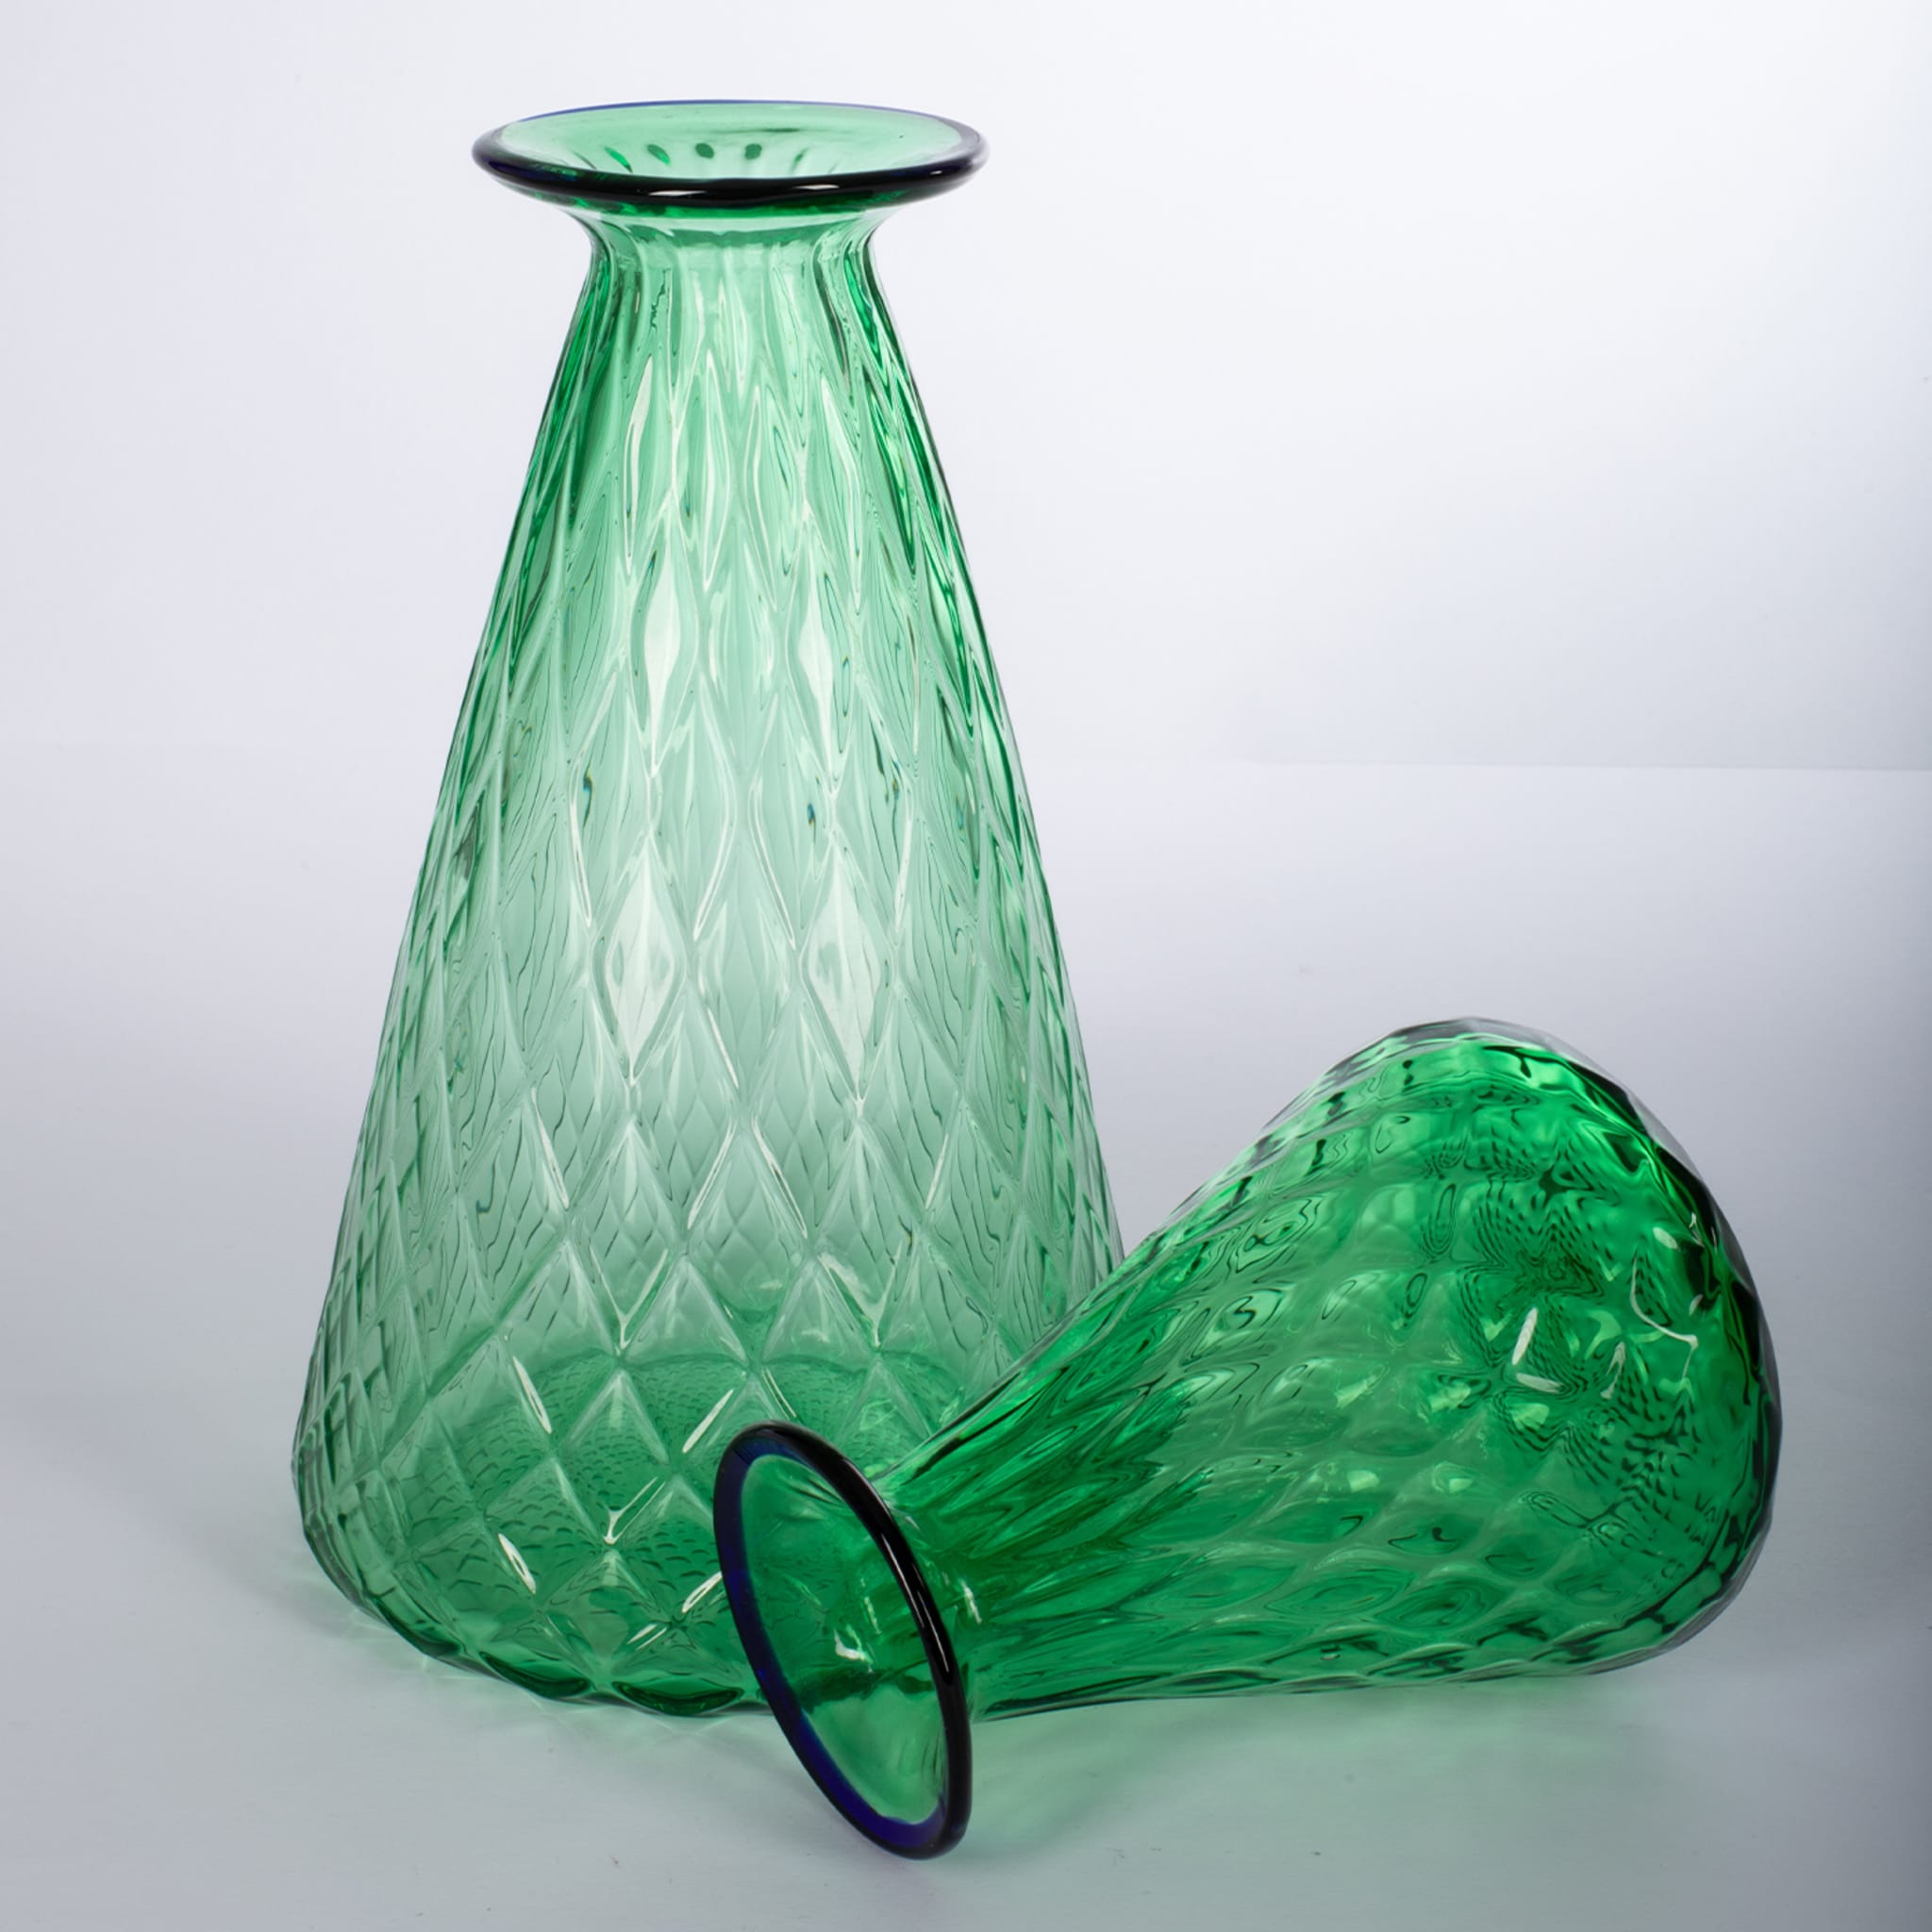 Balloton Set of 2 Conical Green Vases - Alternative view 2